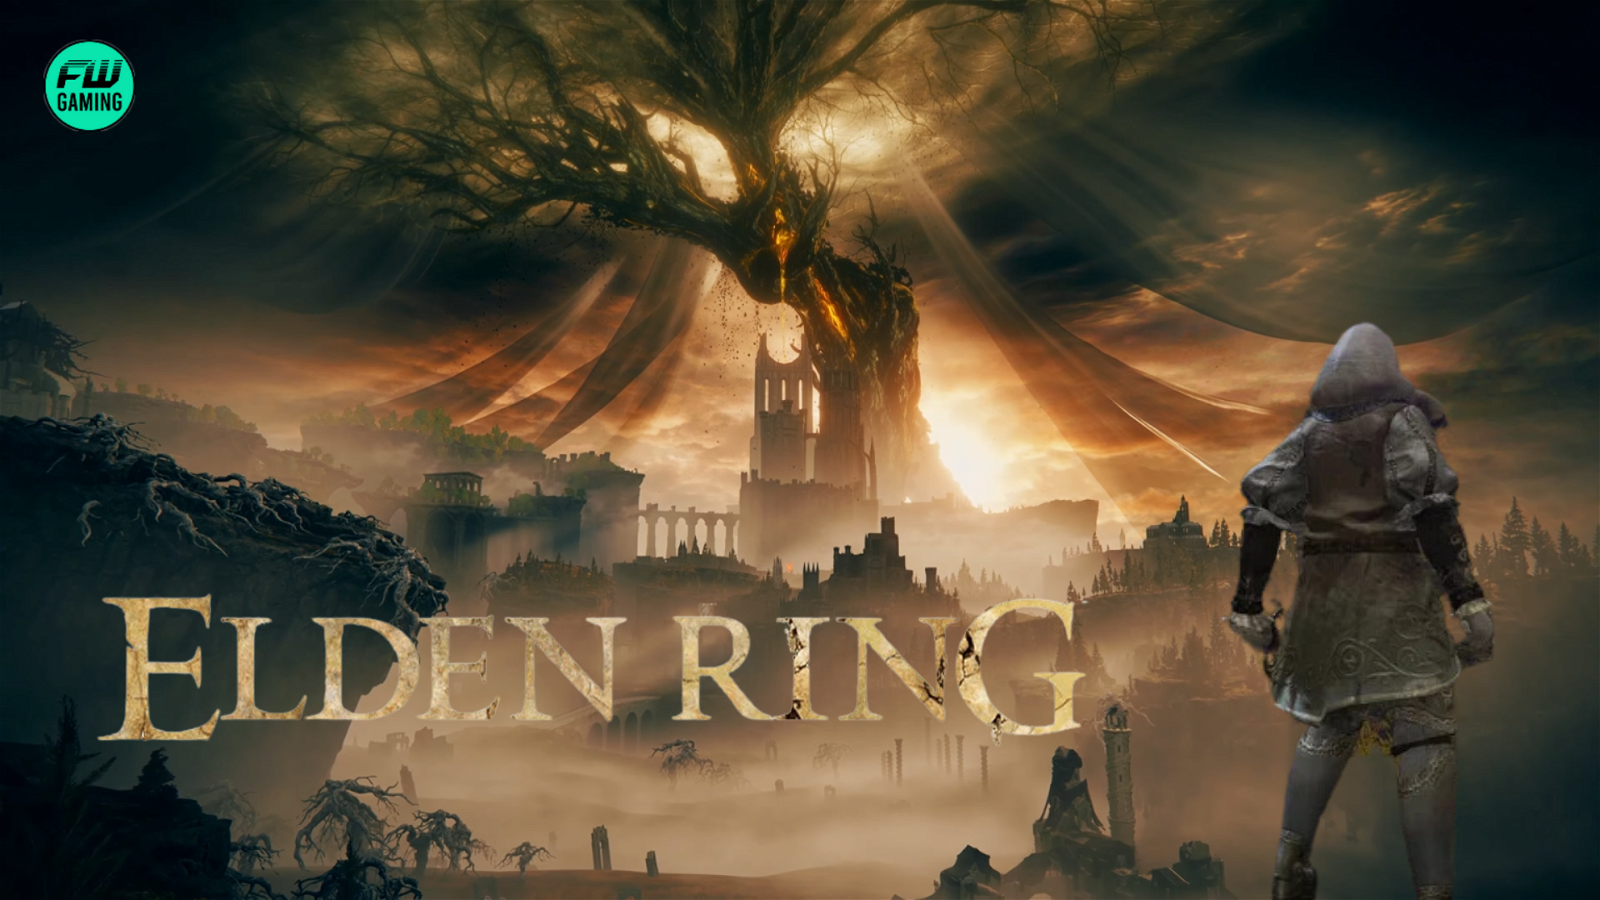 1000s of Hours, Multiple Playthroughs, and Elden Ring Still Has Secrets and Bosses to Uncover